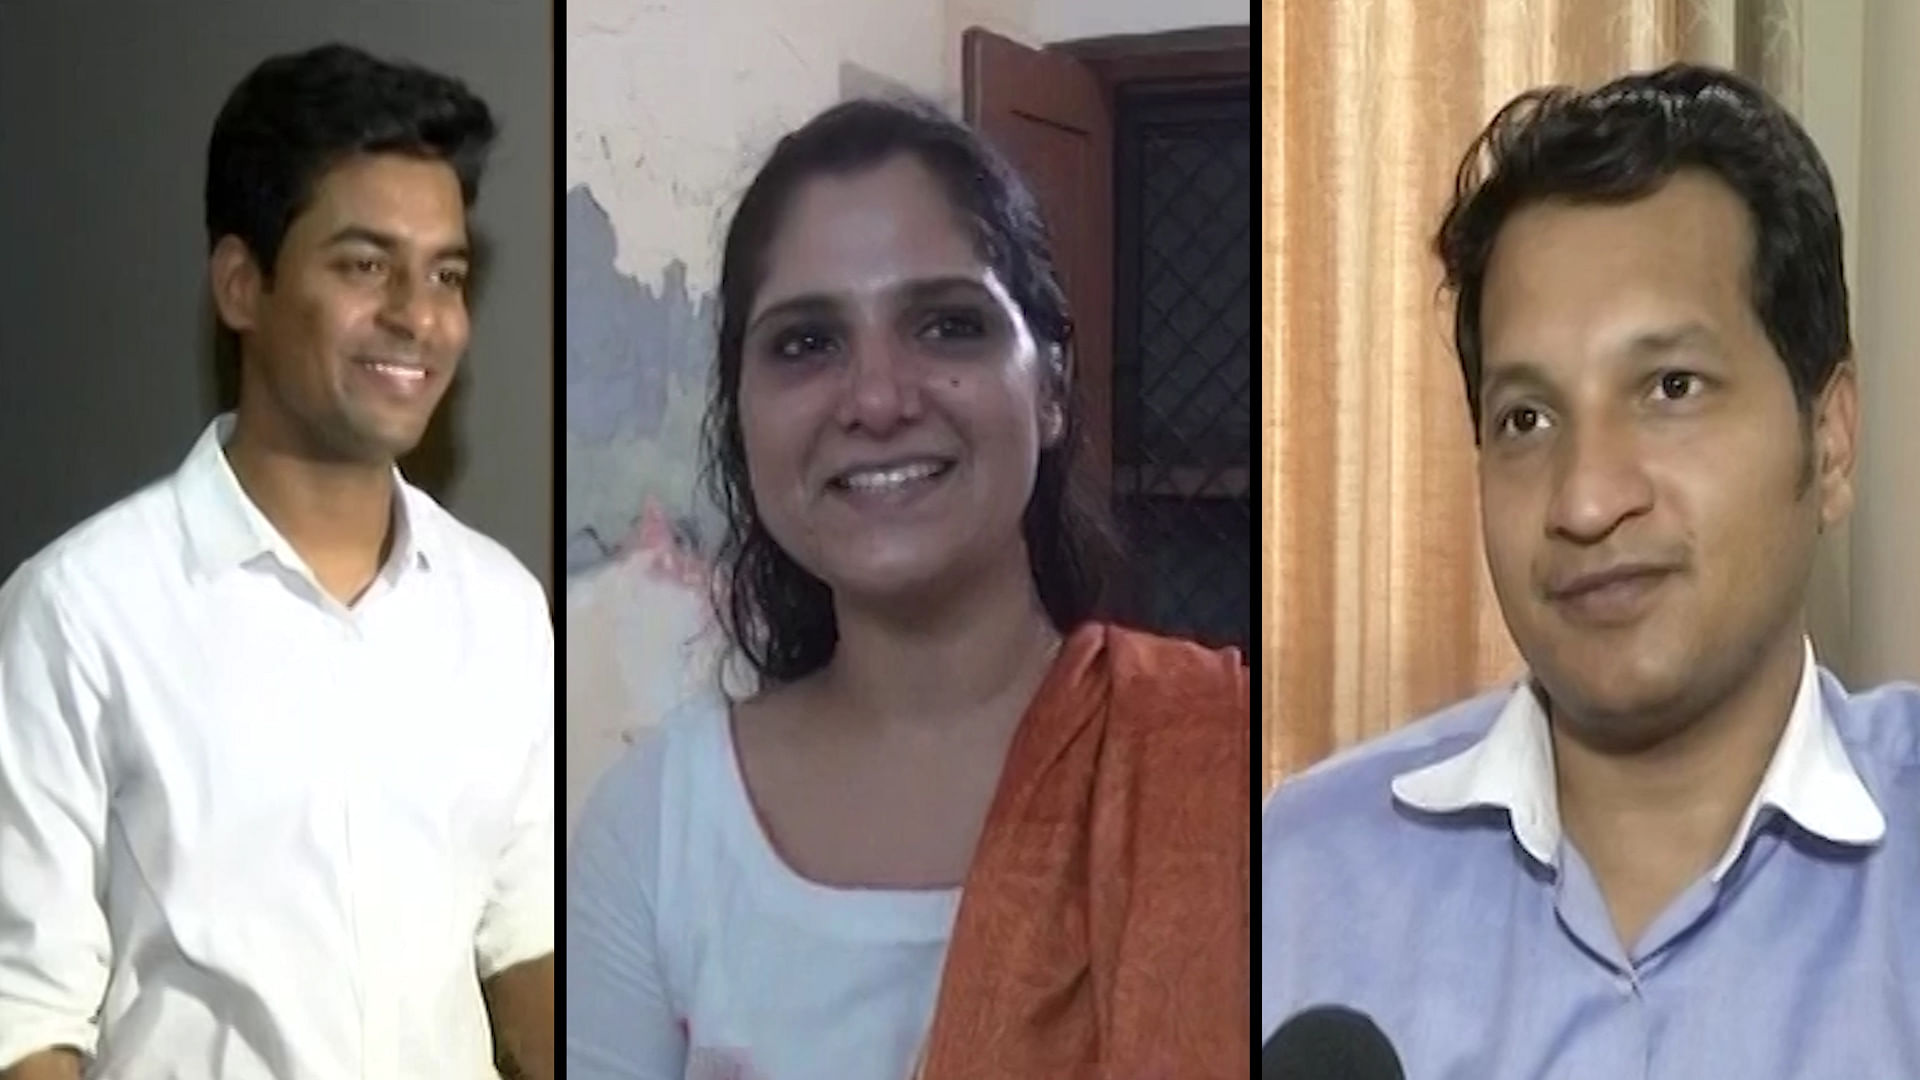 The three 2017 UPSC examination toppers.